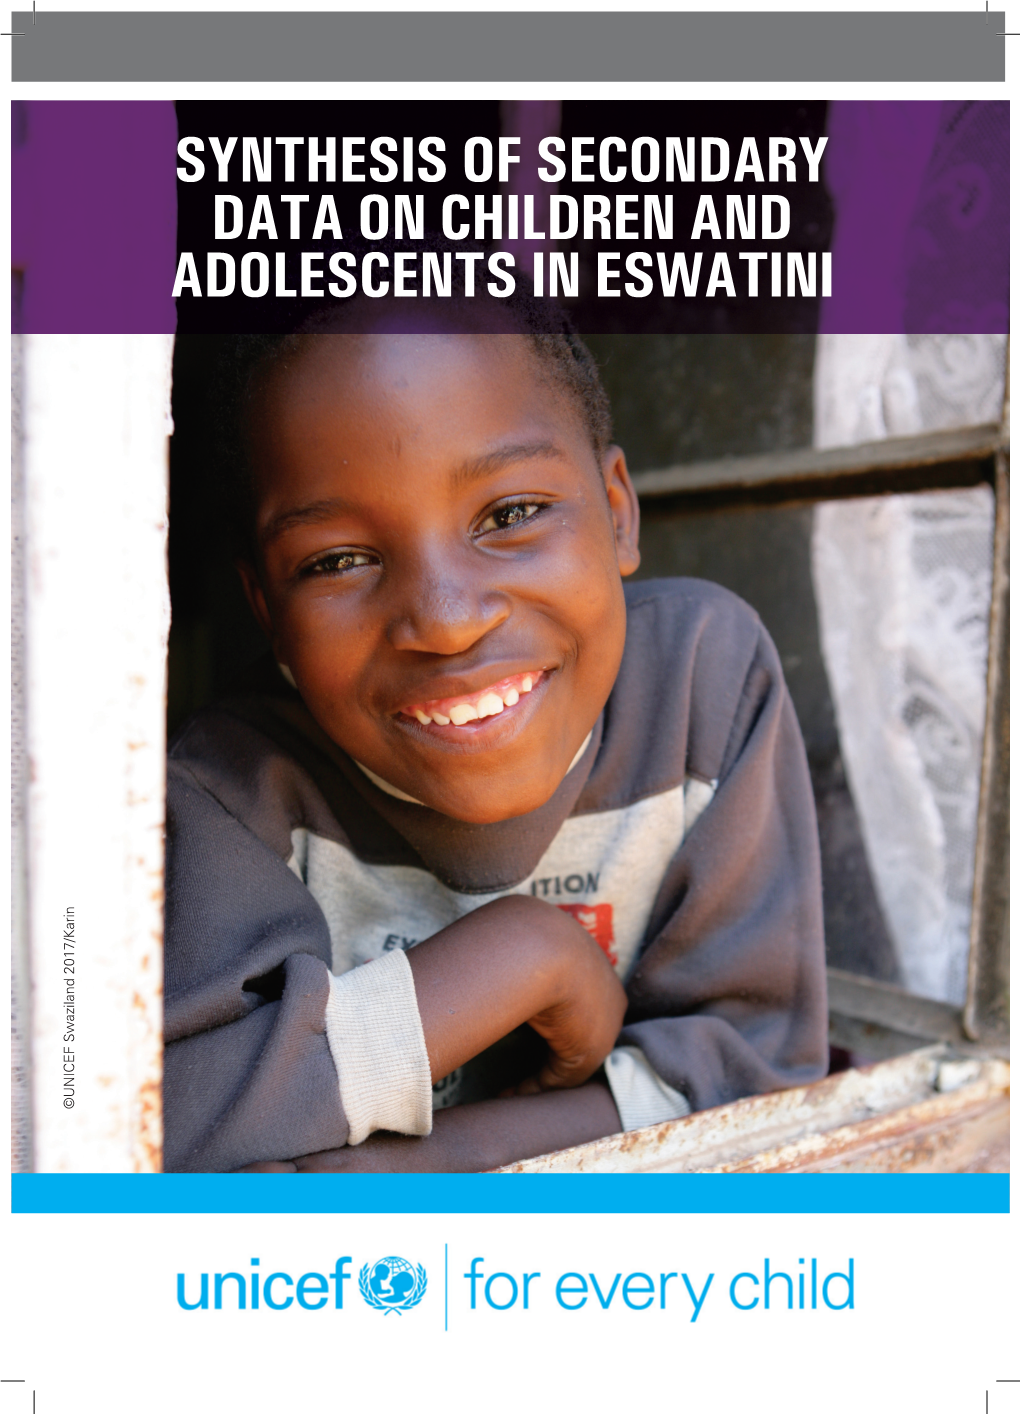 SYNTHESIS of SECONDARY DATA on CHILDREN and ADOLESCENTS in ESWATINI ©UNICEF Swaziland 2017/Karin September 2018 for UNICEF Eswatini